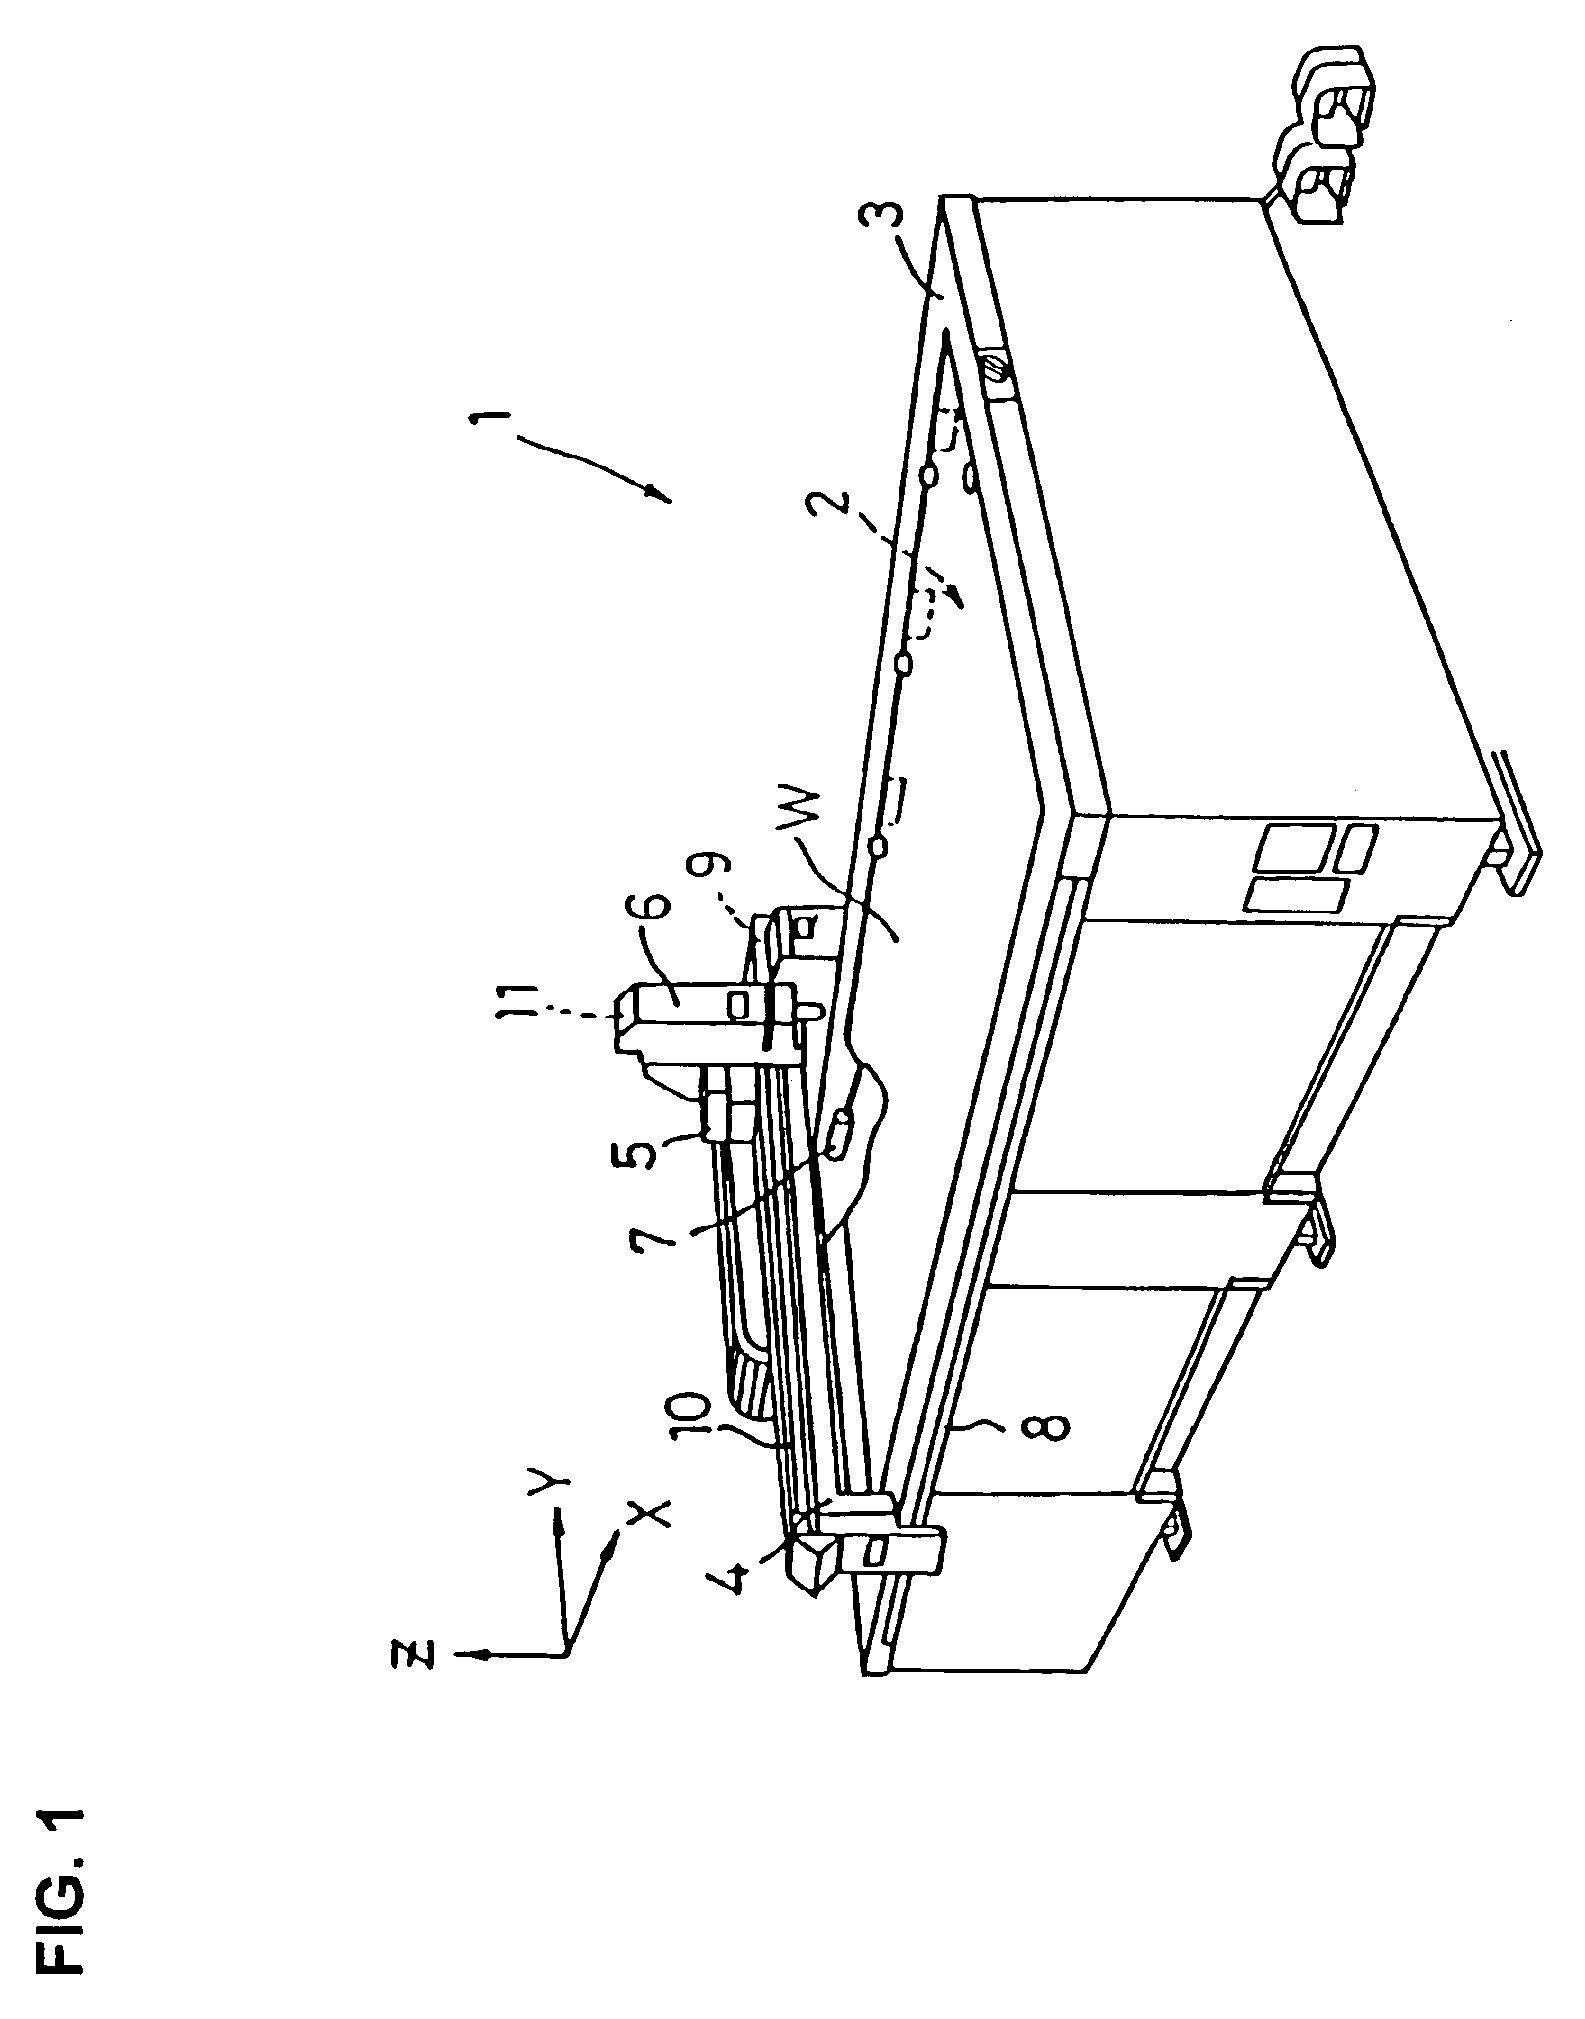 Plasma processing apparatus for monitoring and storing lifetime usage data of a plurality of interchangeable parts